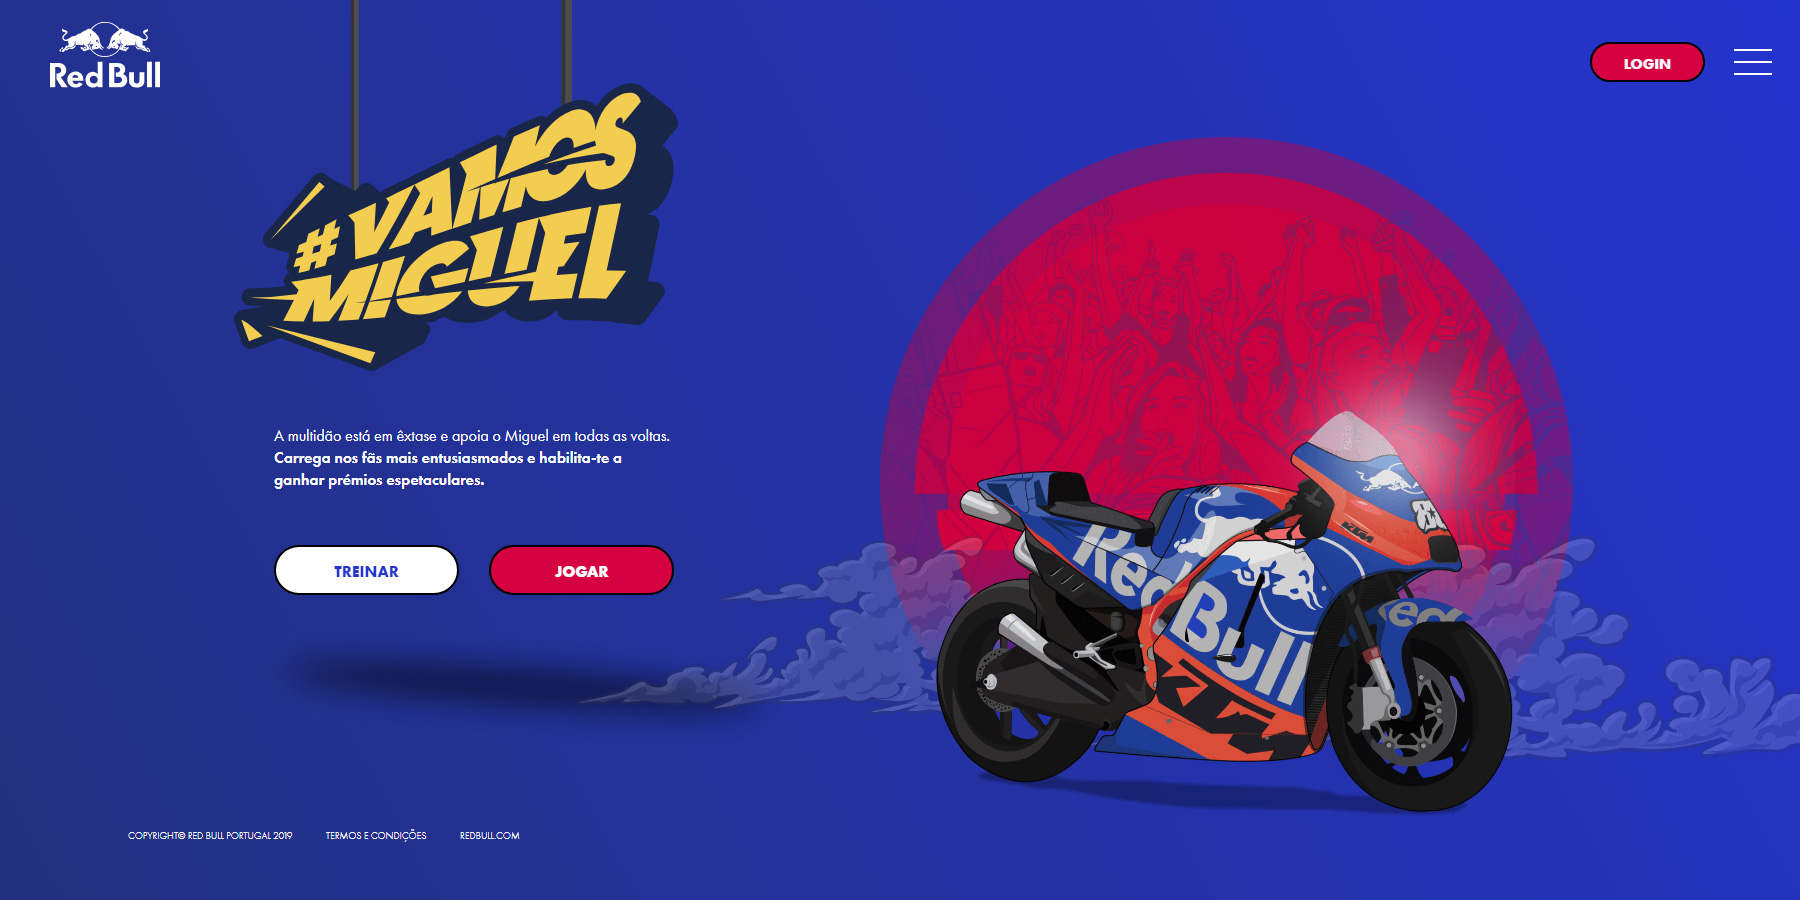 Mo88 Let's support Miguel Oliveira - Website of the Day